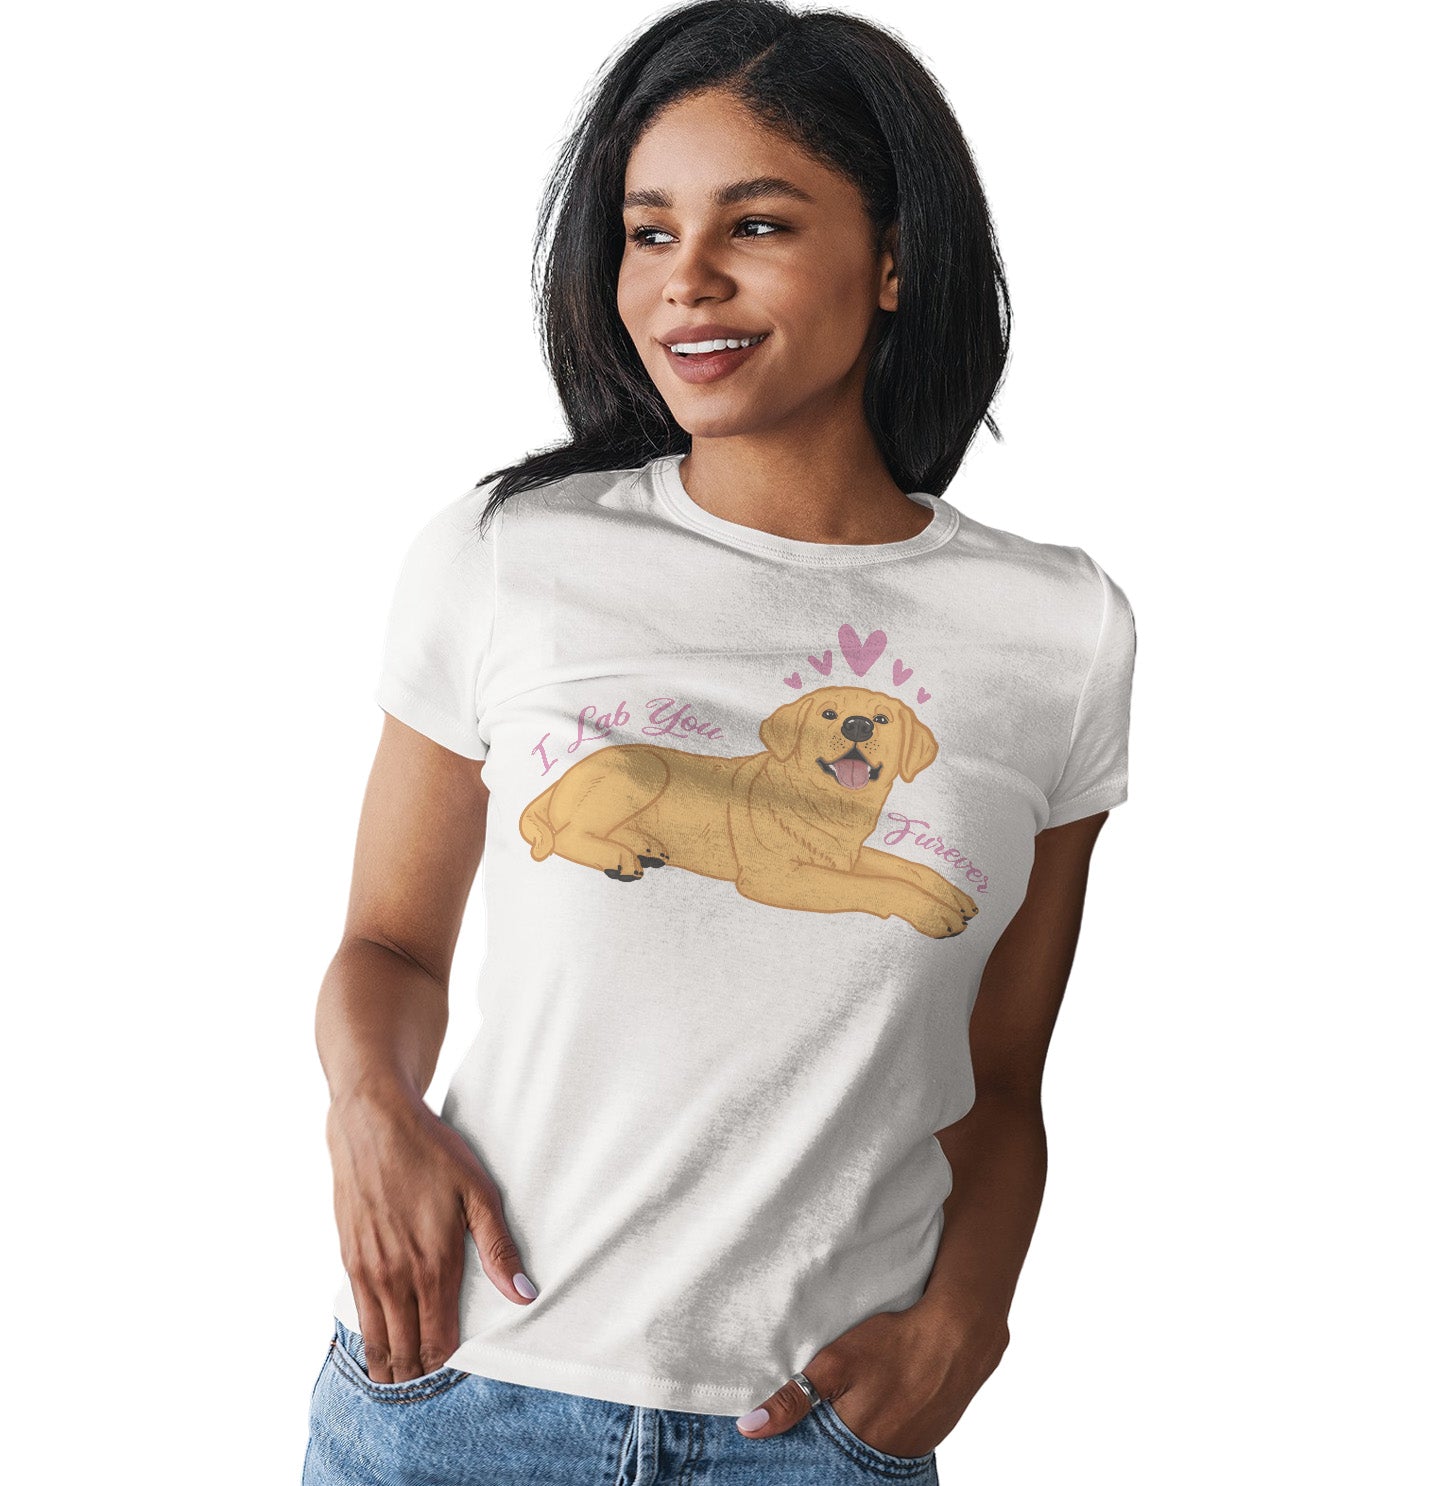 Labradors.com - Yellow Lab You Forever - Women's Fitted T-Shirt